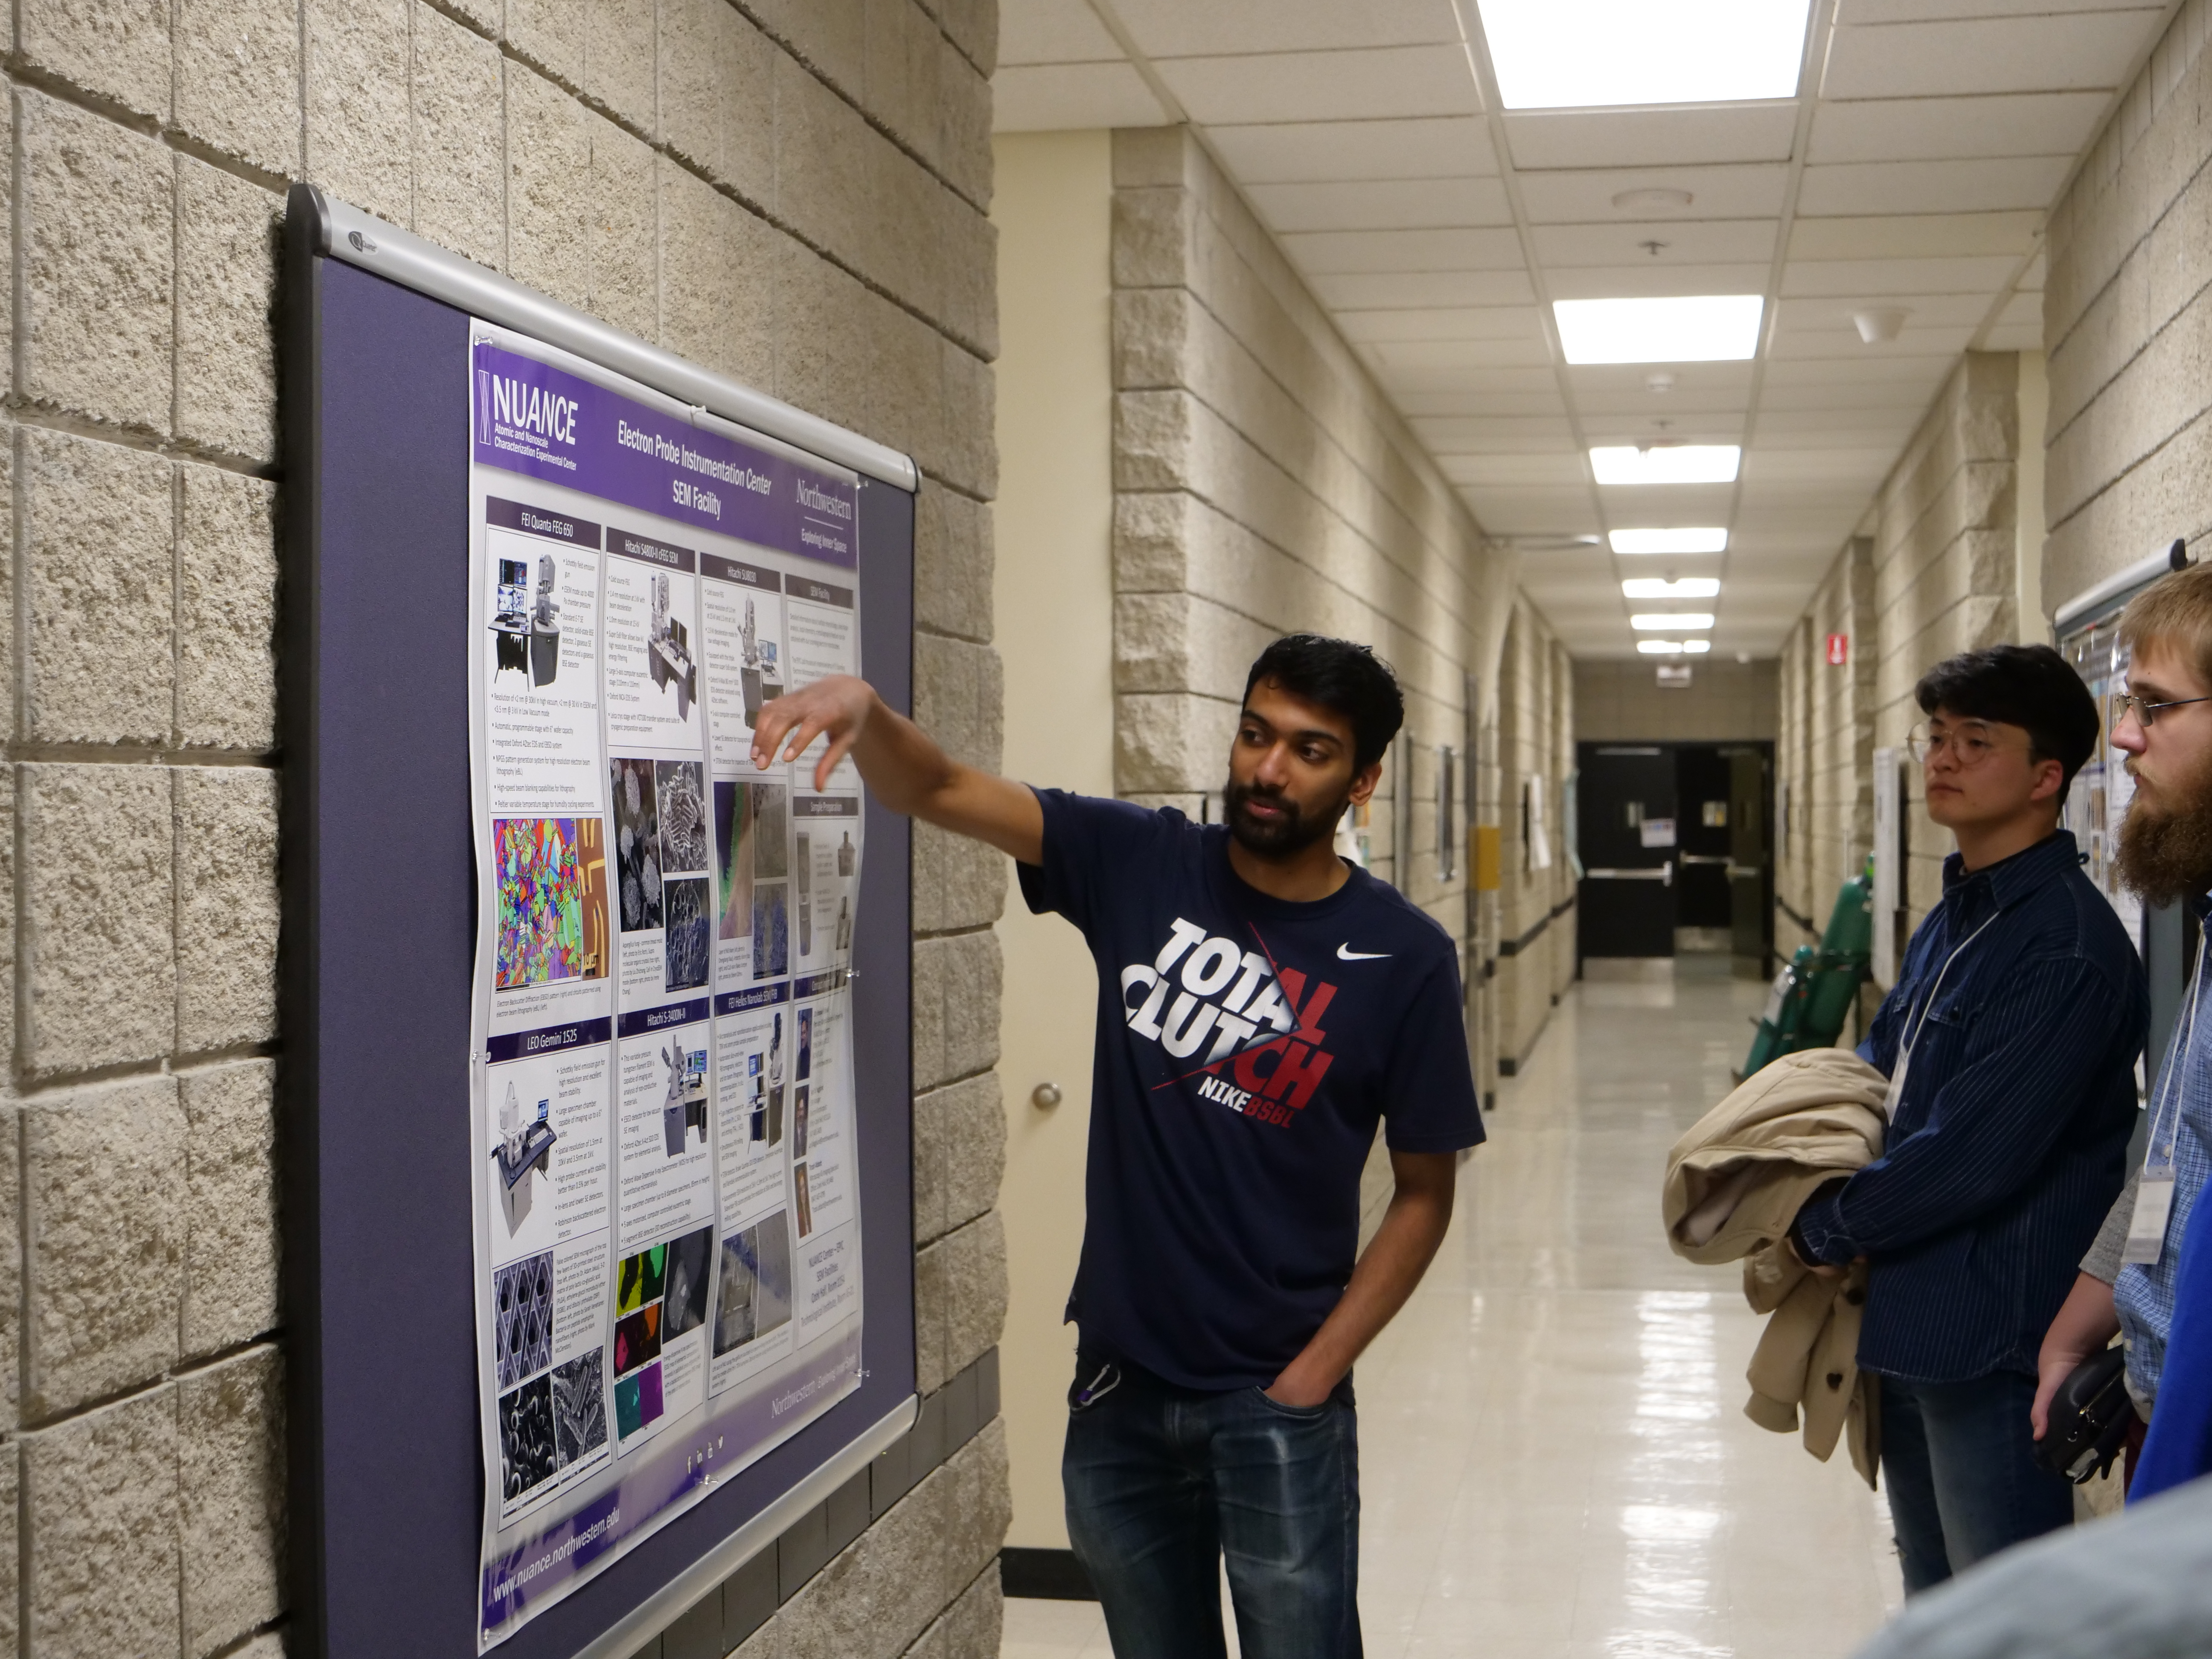 Akshay Murthy discusses a research poster during the Mechanical Engineering tour.